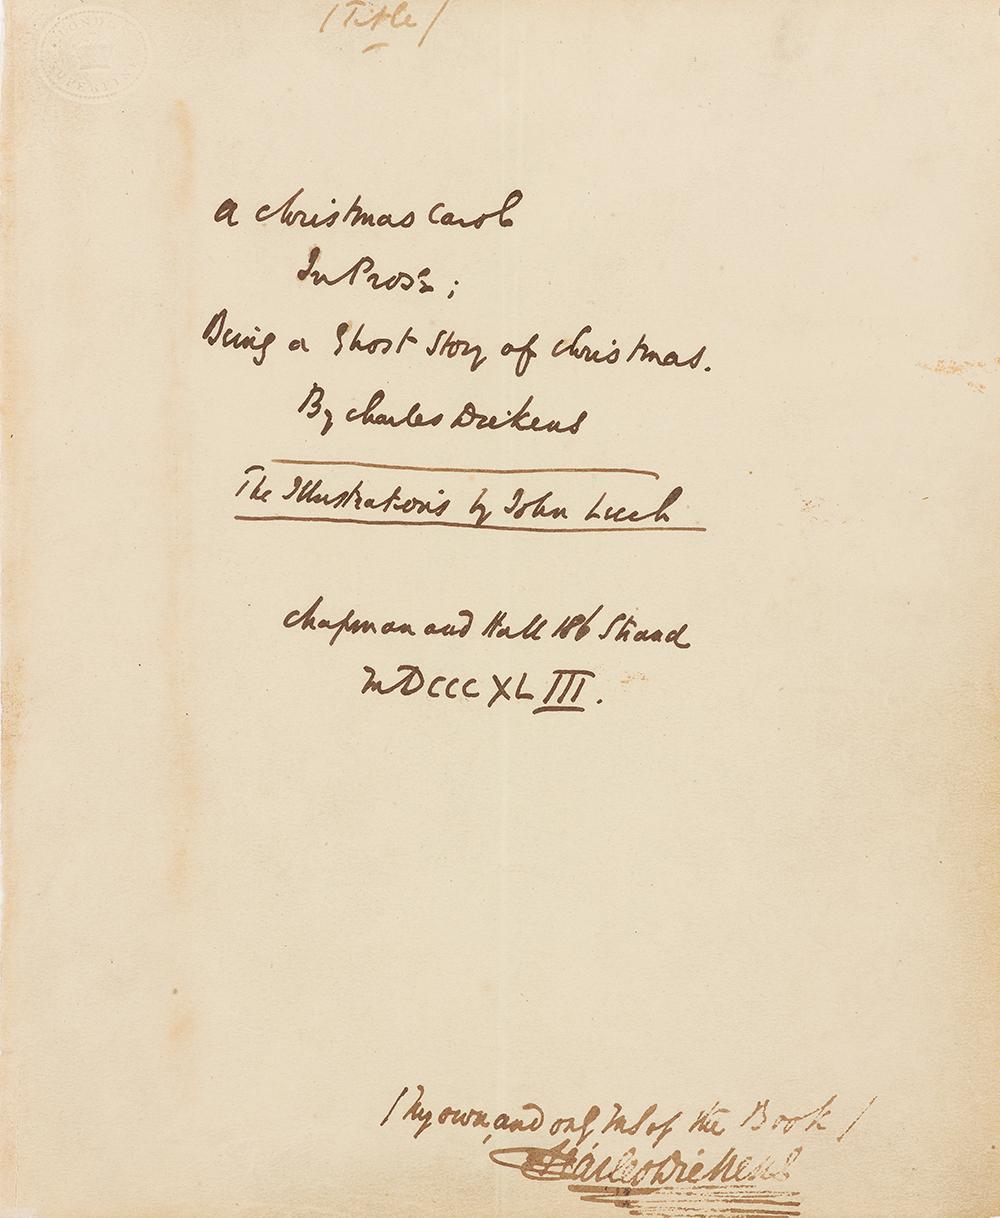 "A Christmas Carol in Prose: Being a Short Story for Christmas," 1843, by Charles Dickens. Autographed manuscript. Purchased by Pierpont Morgan before 1900, The Morgan Library & Museum. (Graham Haber)